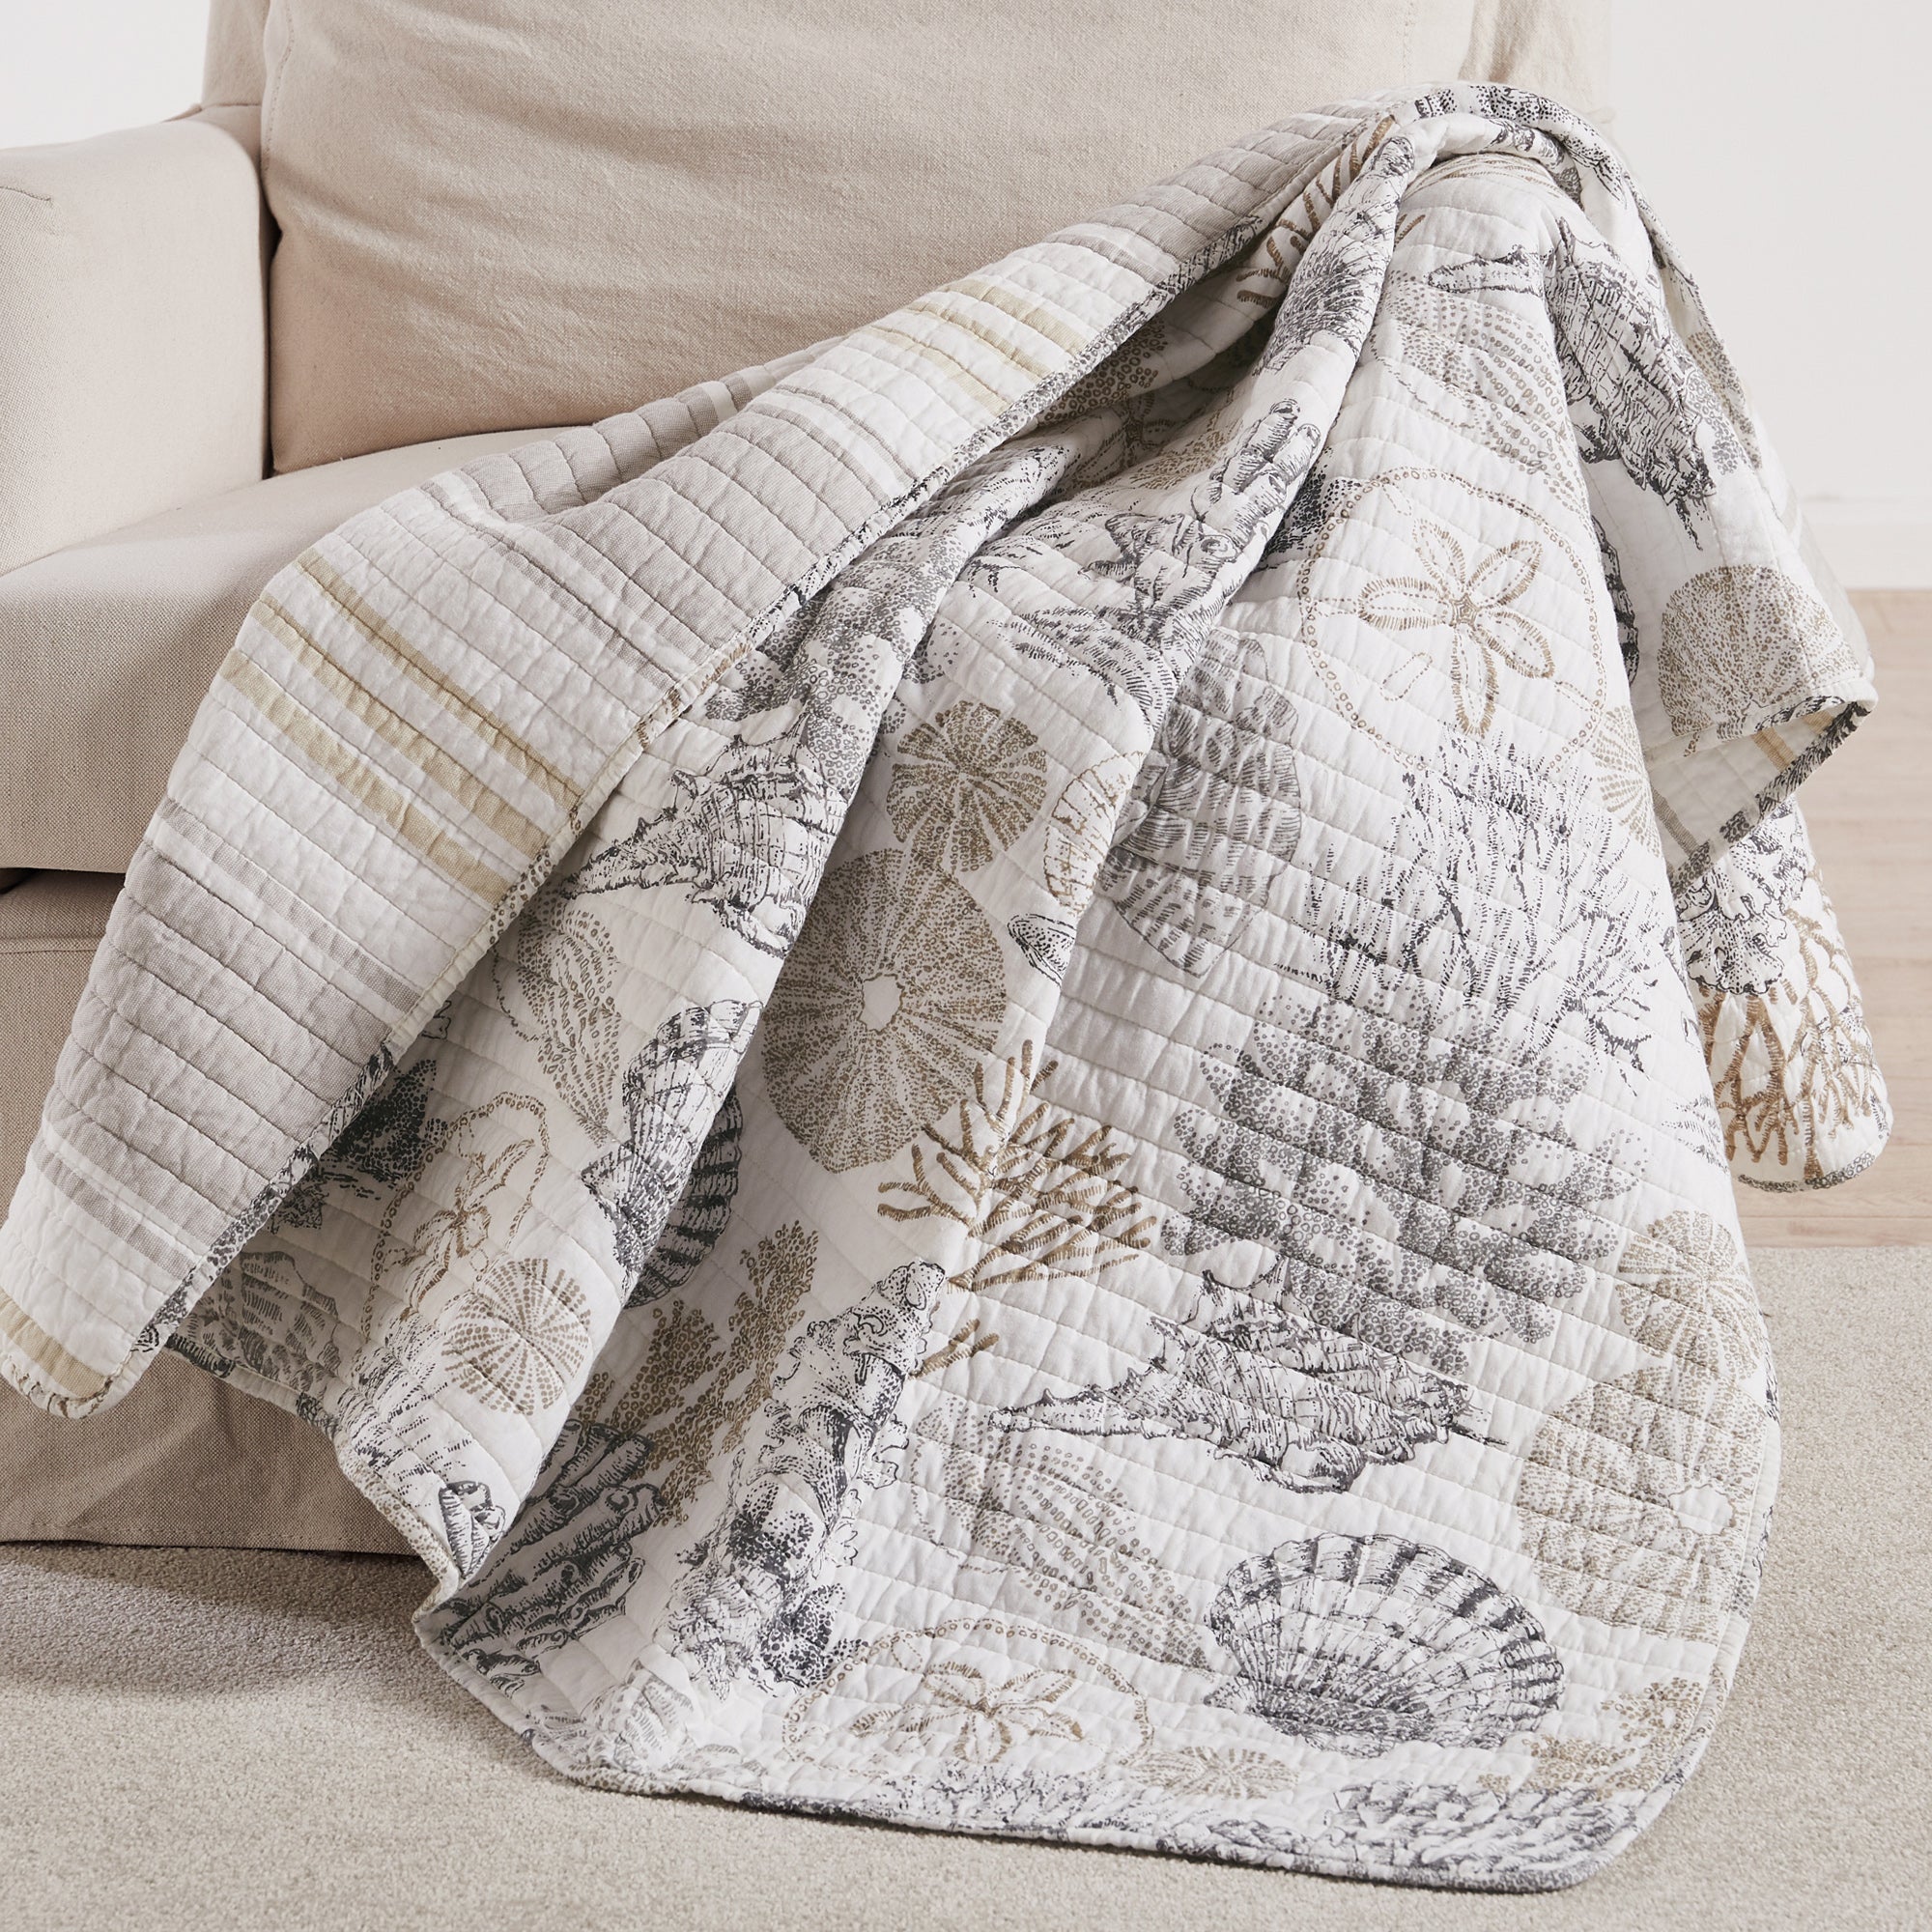 Caspian Sea Quilted Throw